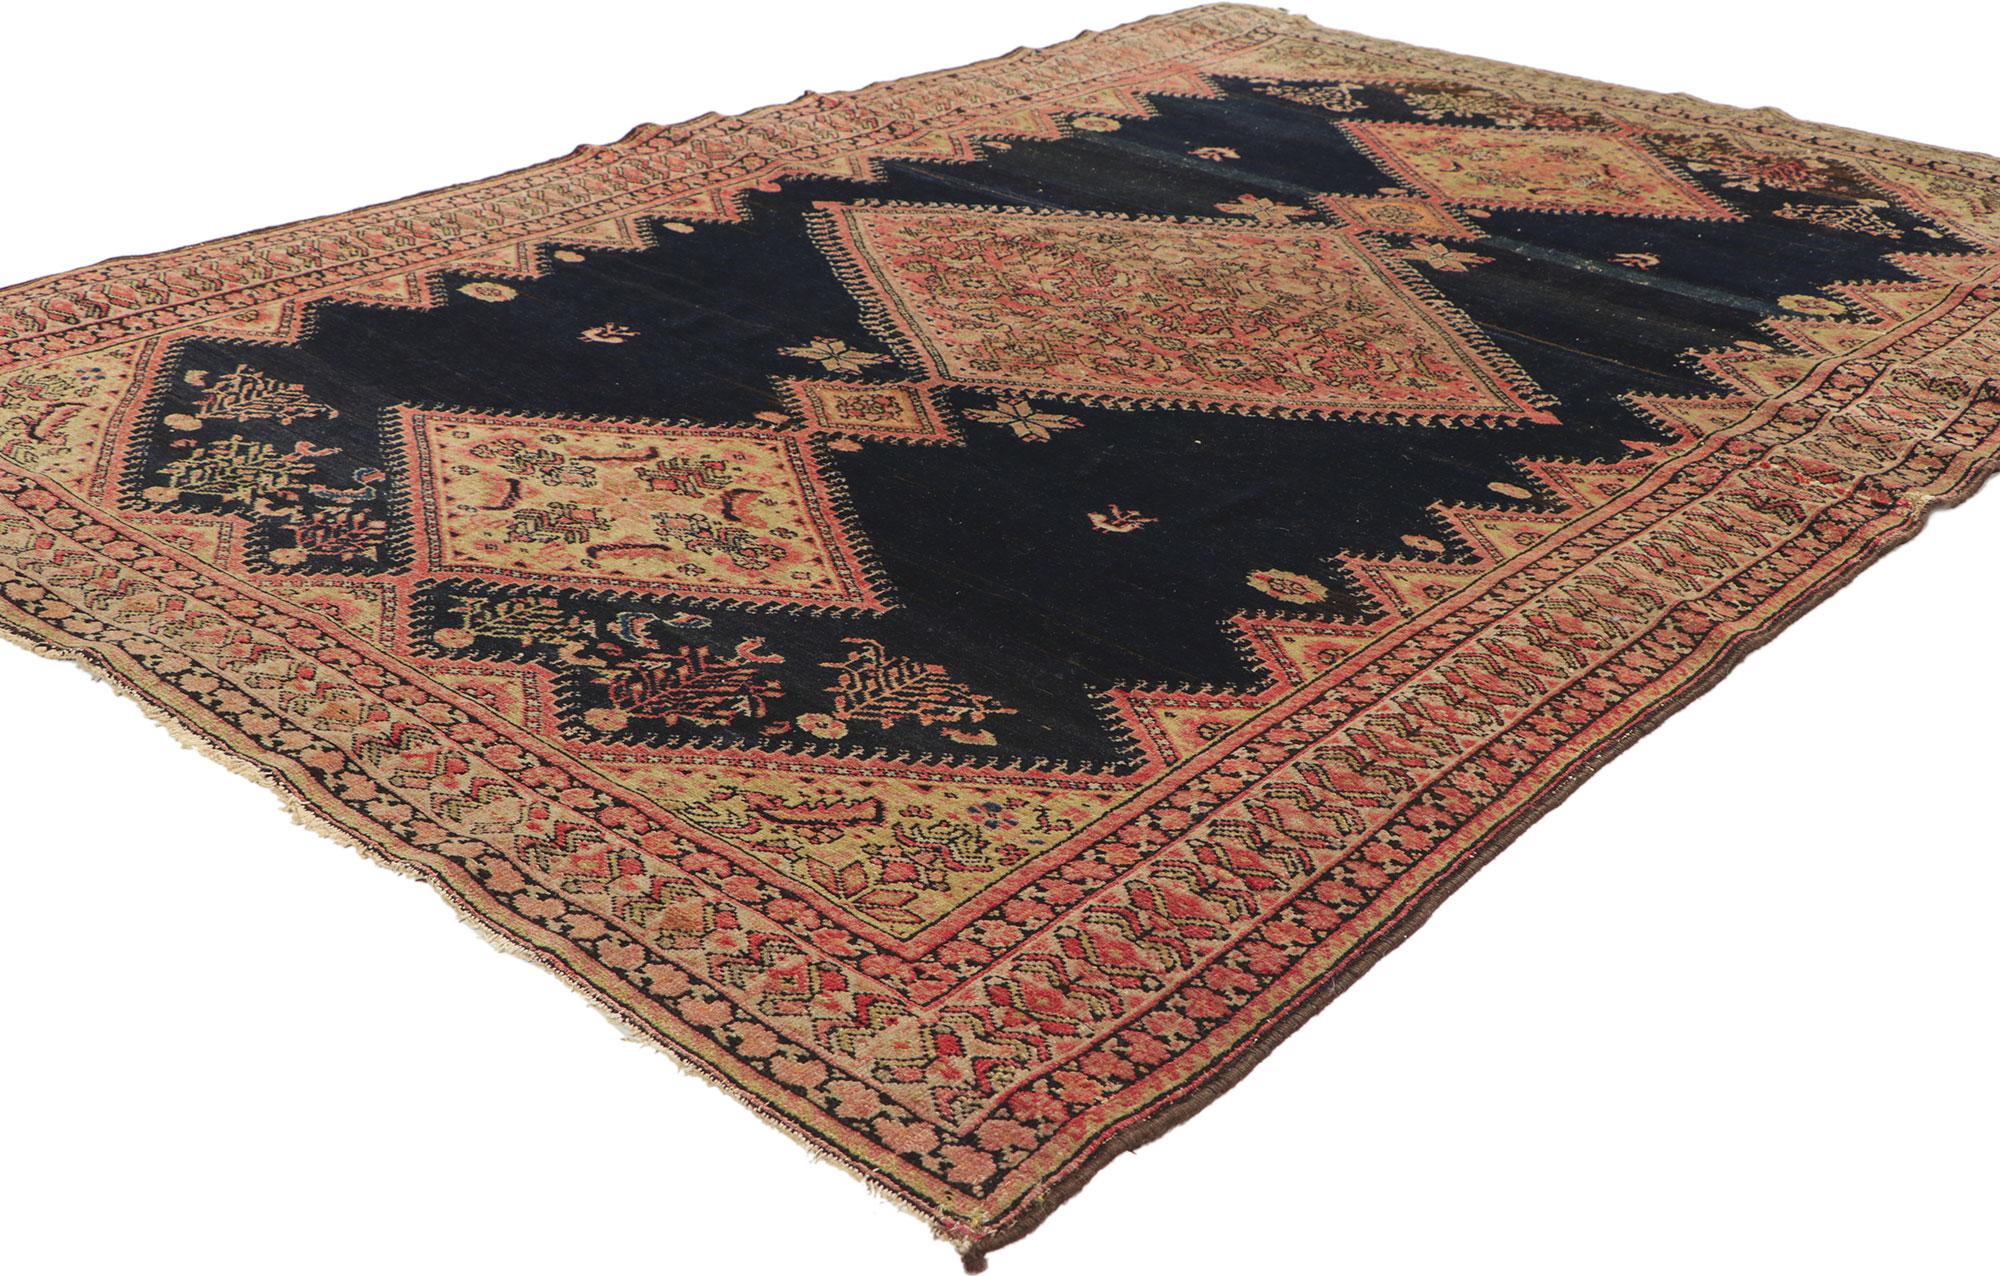 78518 Antique Persian Malayer Rug, 04'01 x 06'03. Emanating timeless style with incredible detail and texture, this hand knotted wool antique Persian Malayer rug is a captivating vision of woven beauty. They eye-catching Herati design and